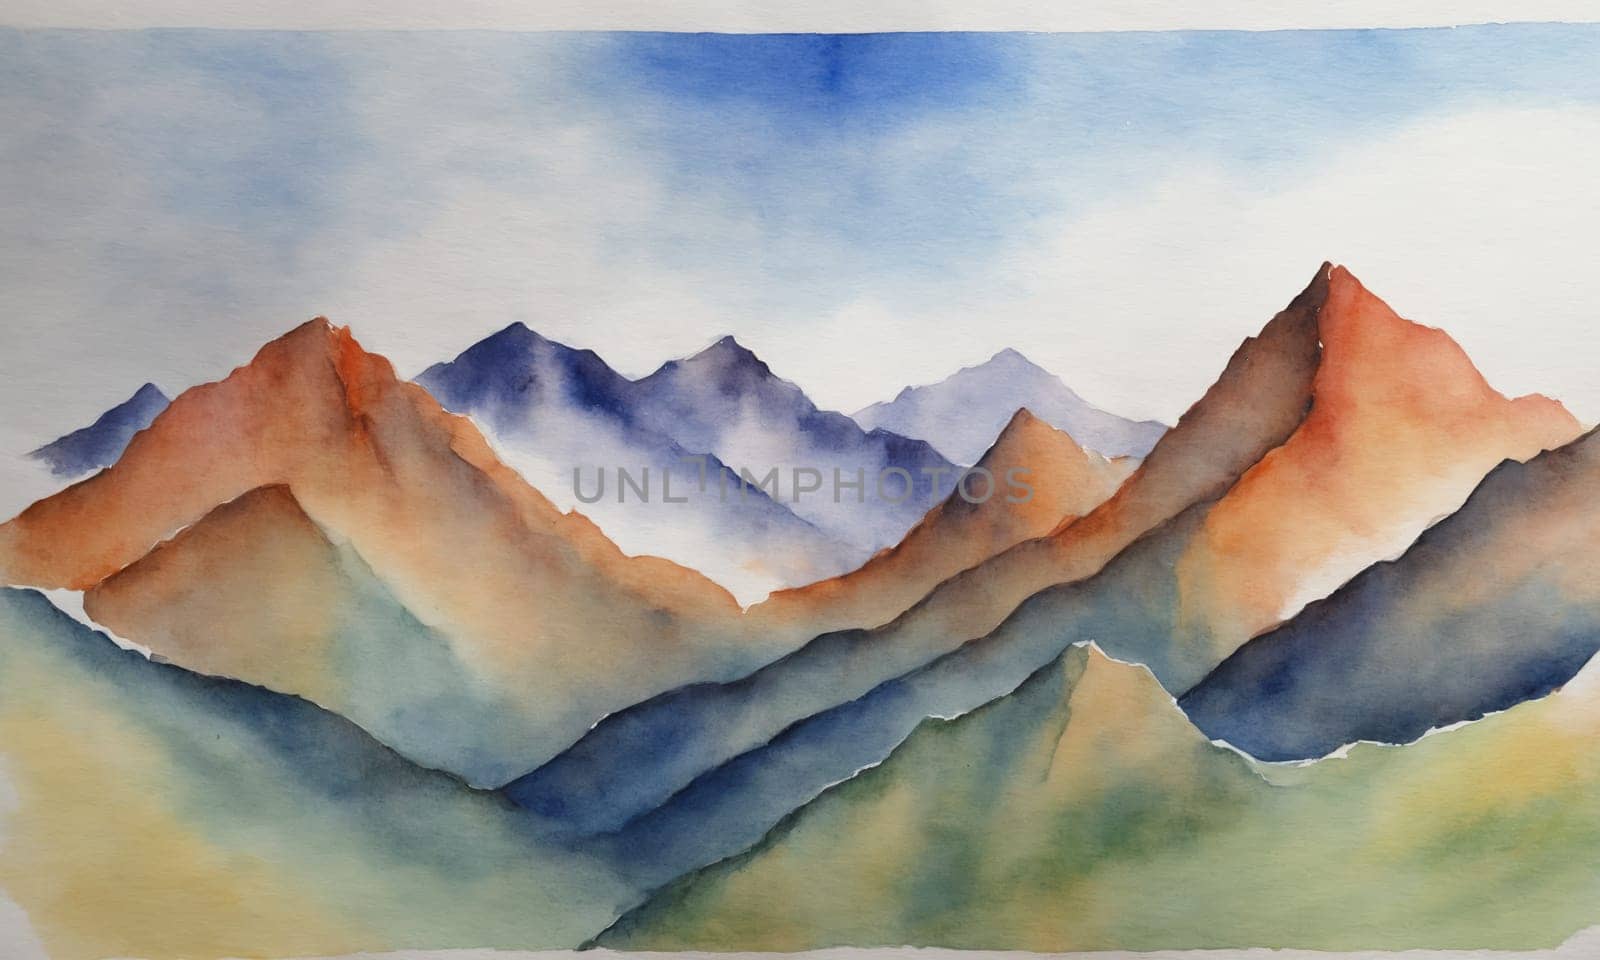 Abstract watercolor painting of mountains. Digital art painting on canvas. by Andre1ns